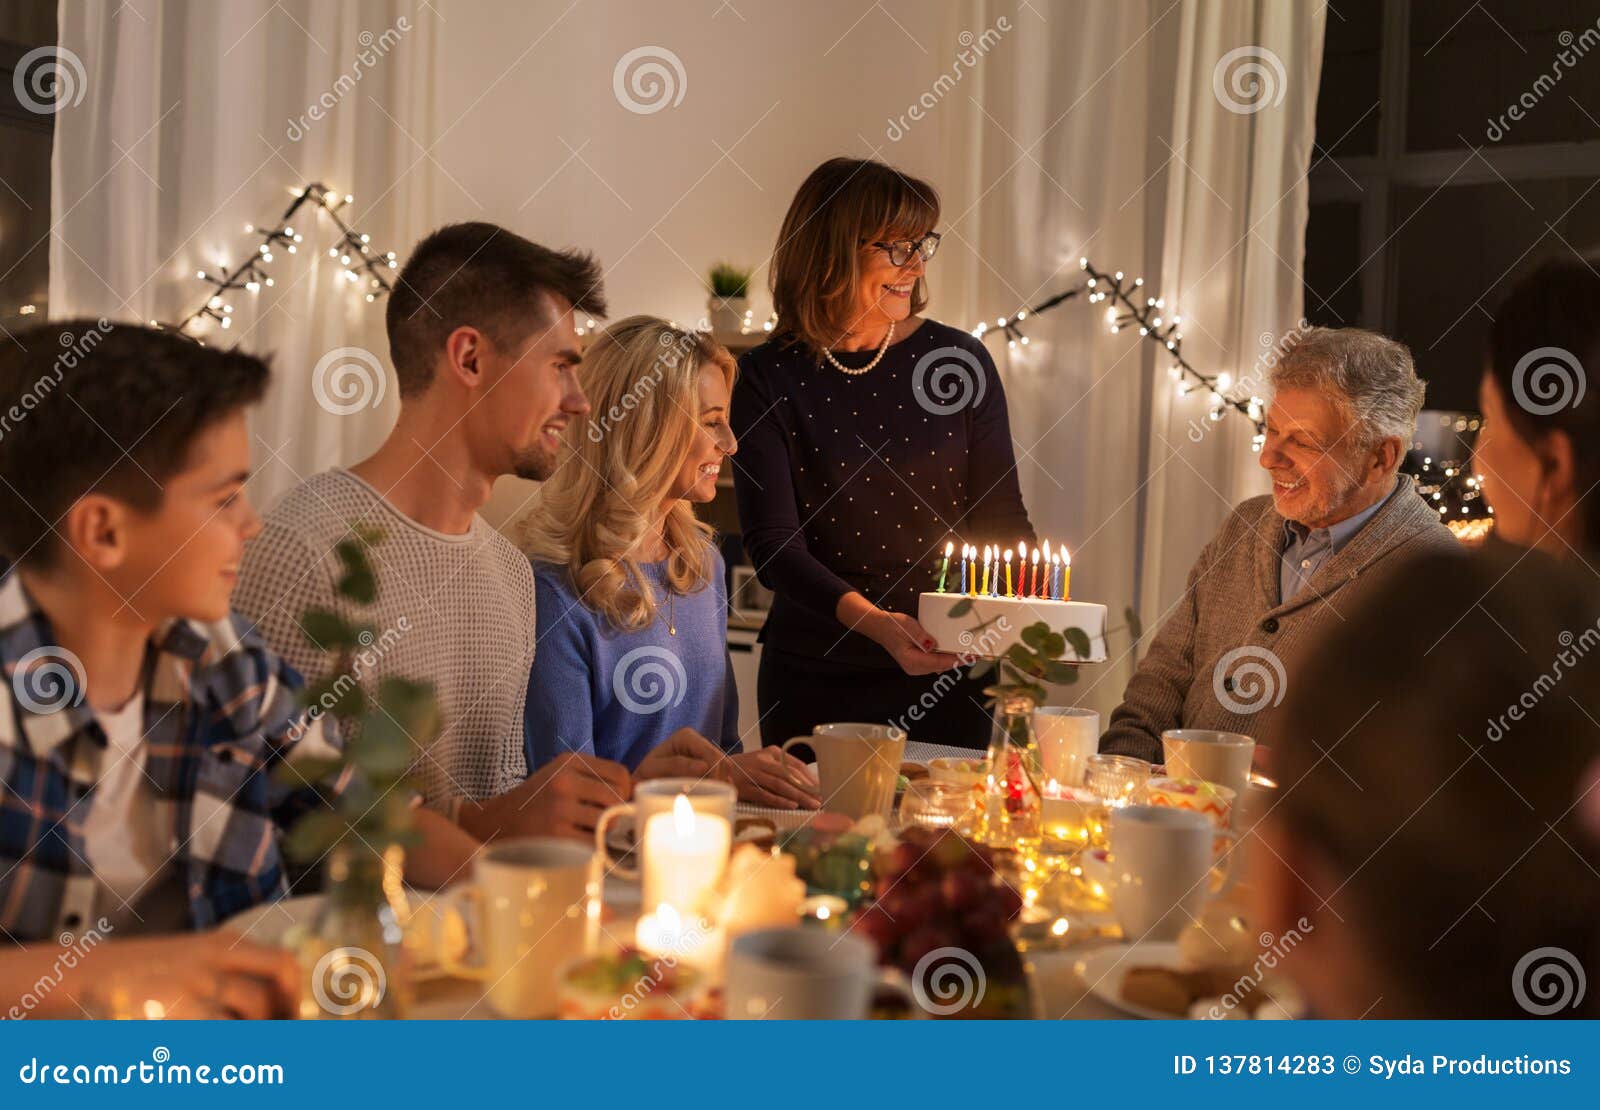 Happy Family Having Birthday Party at Home Stock Image - Image of